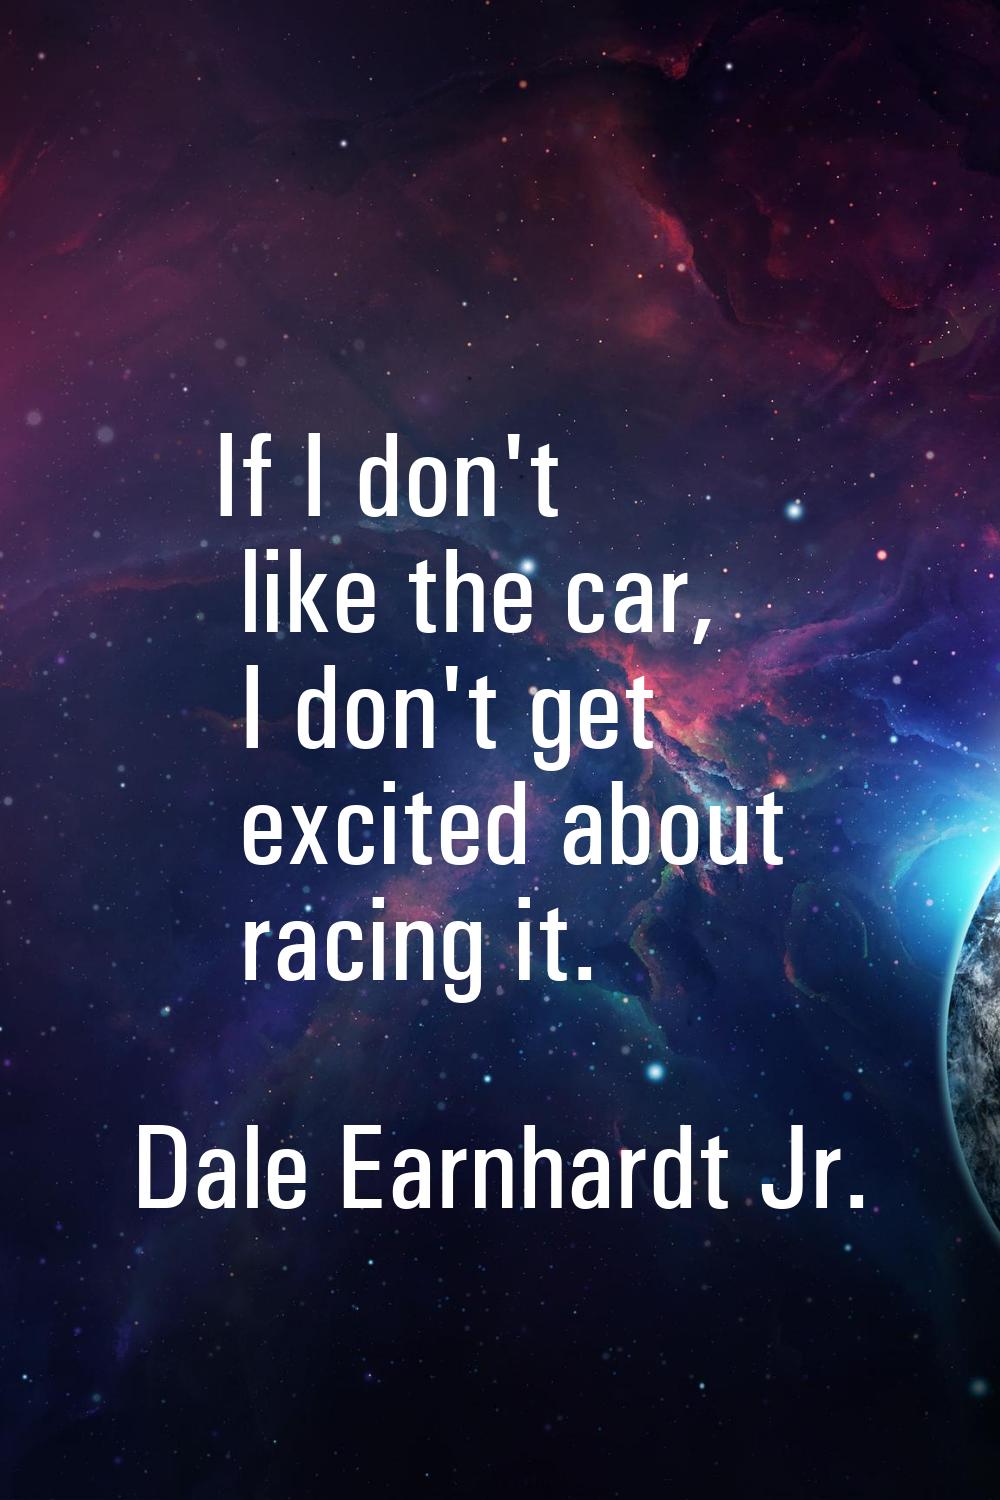 If I don't like the car, I don't get excited about racing it.